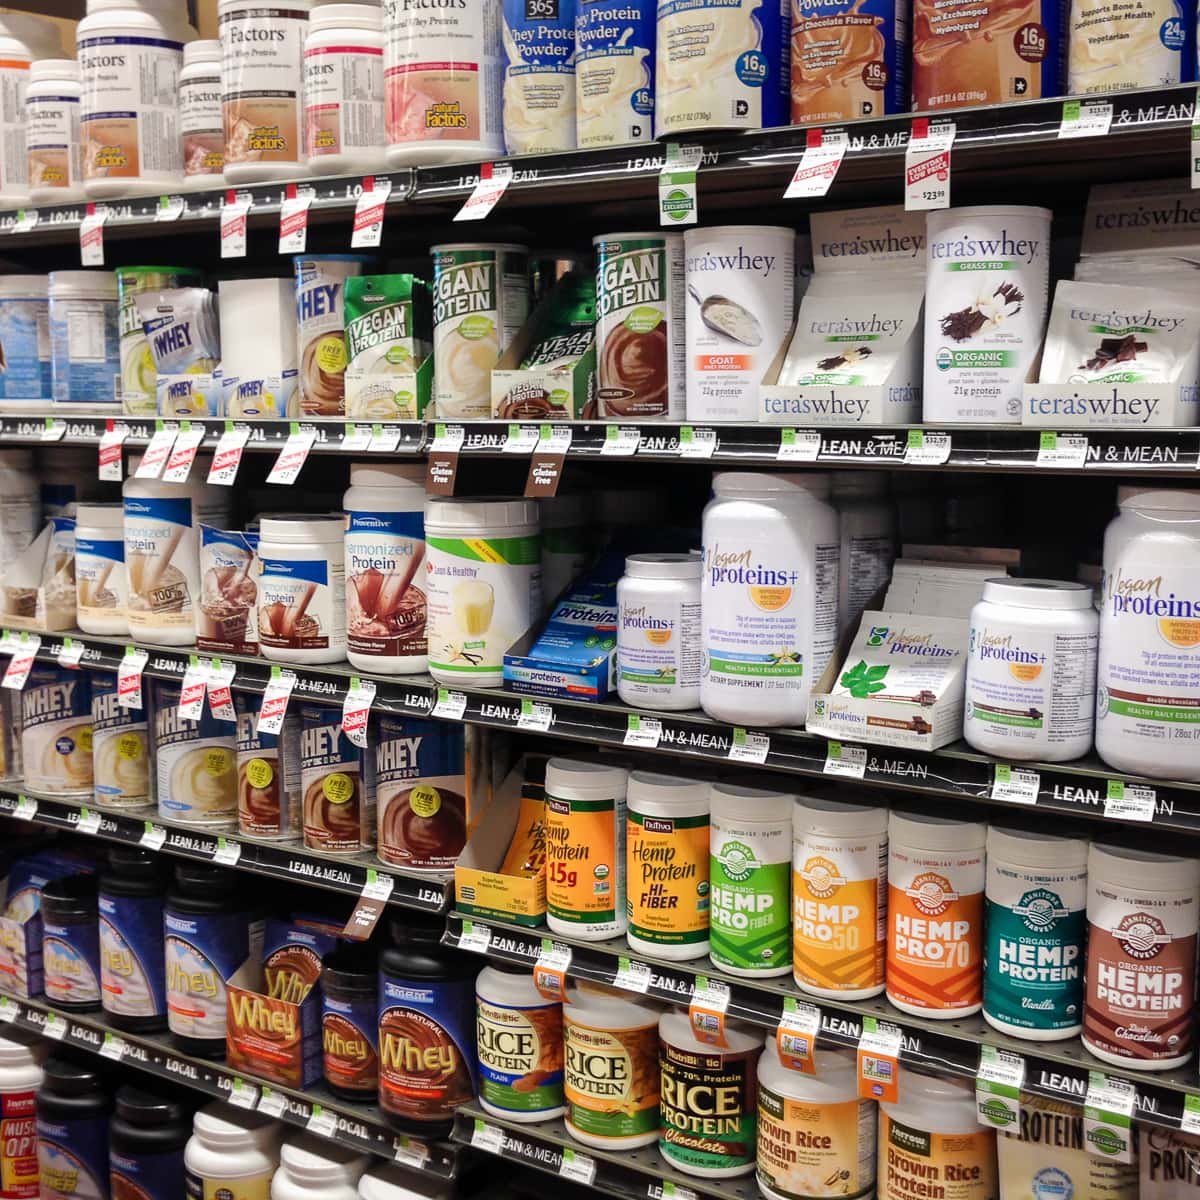 Protein powder brands on shelves at the market.